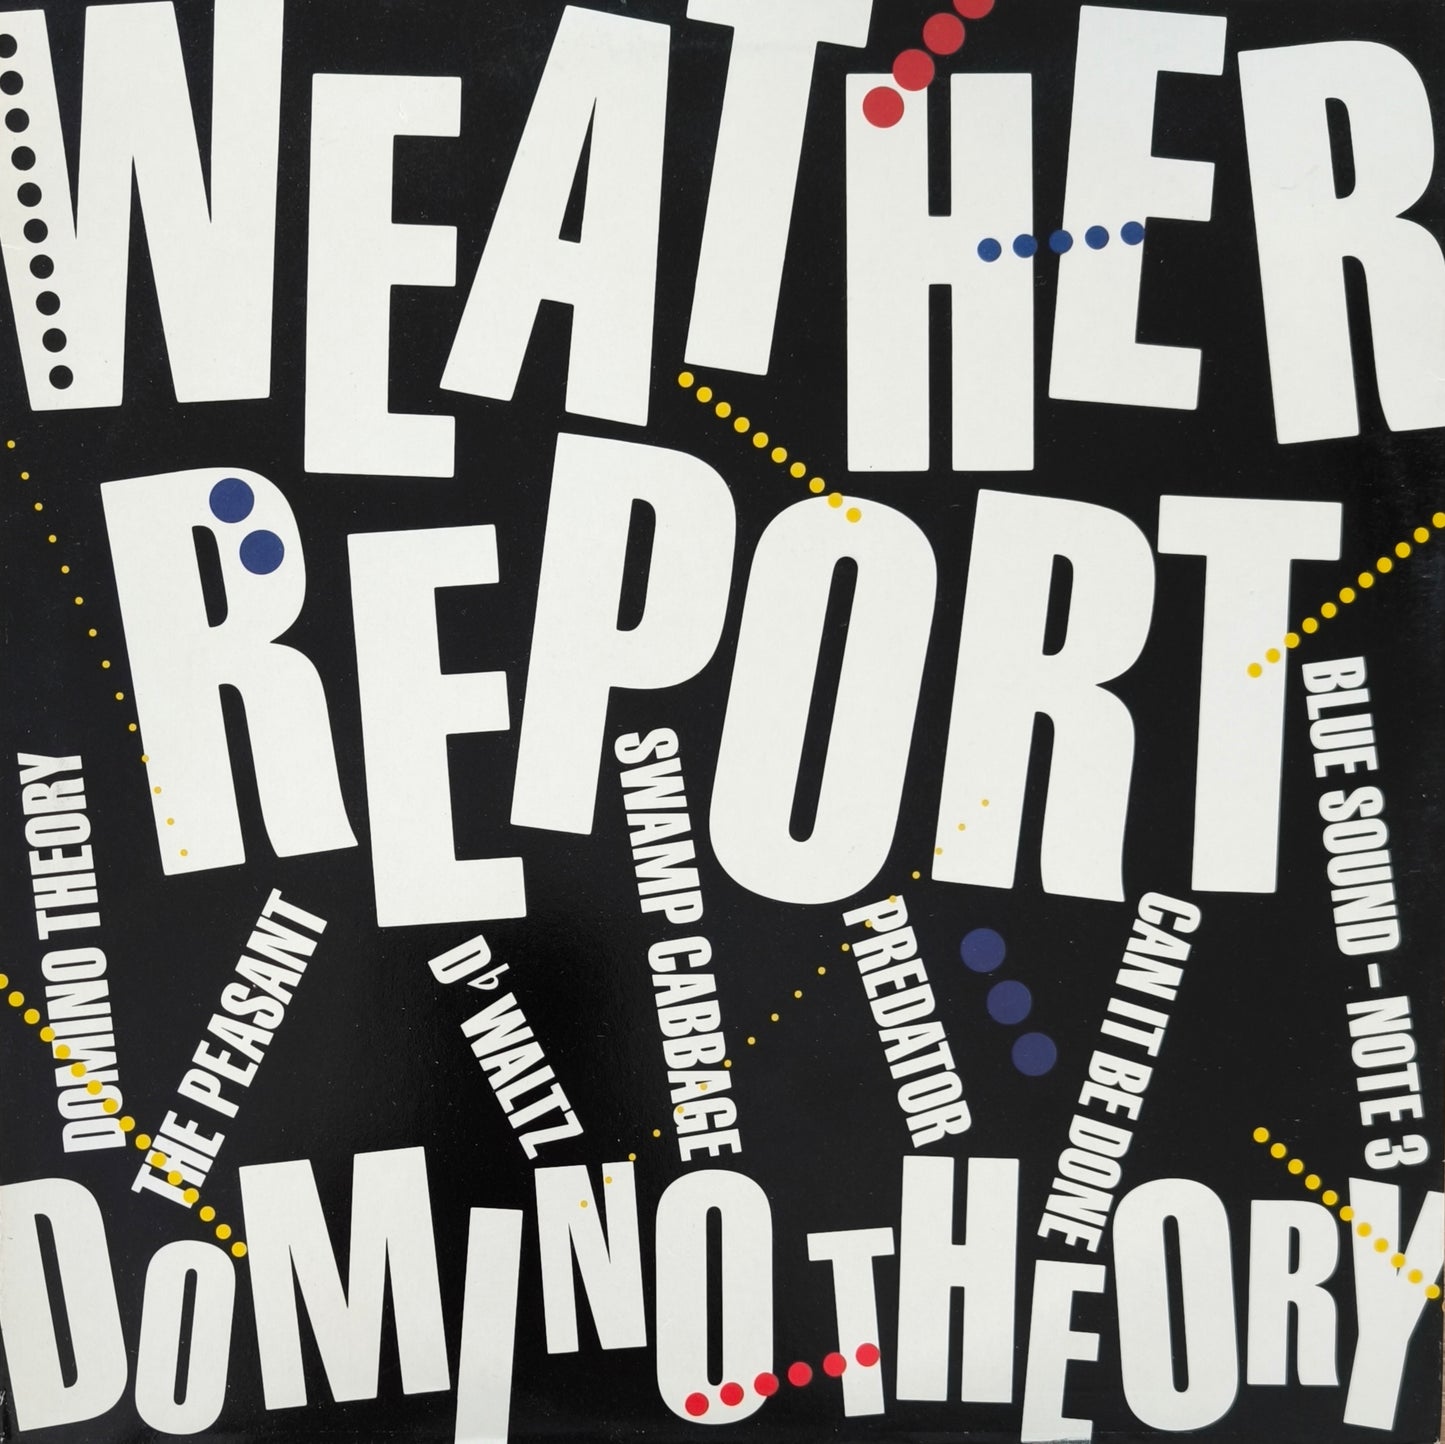 WEATHER REPORT - Domino Theory